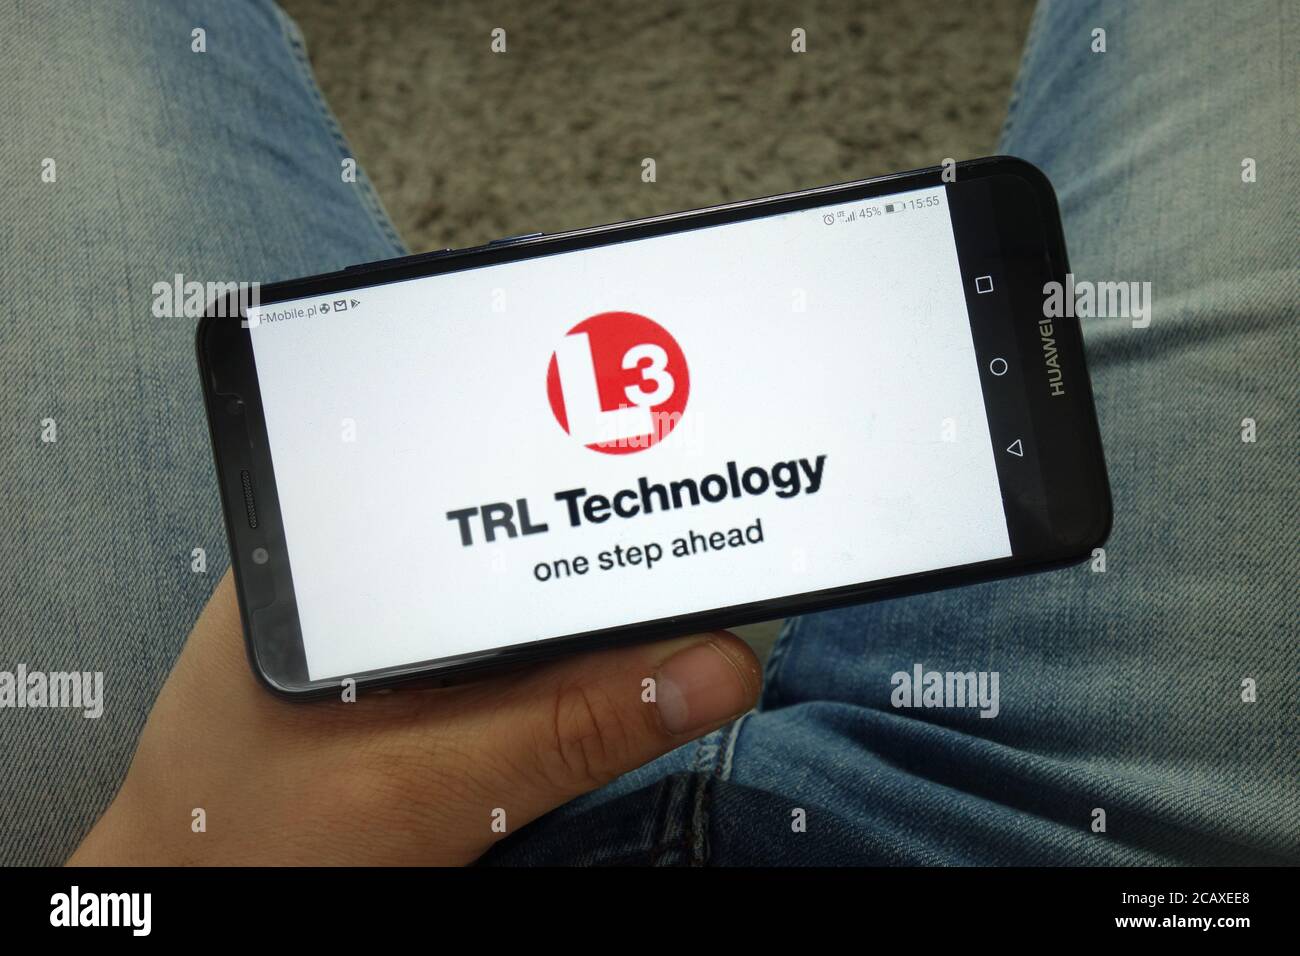 Man holding smartphone with L3 TRL Technology company logo Stock Photo